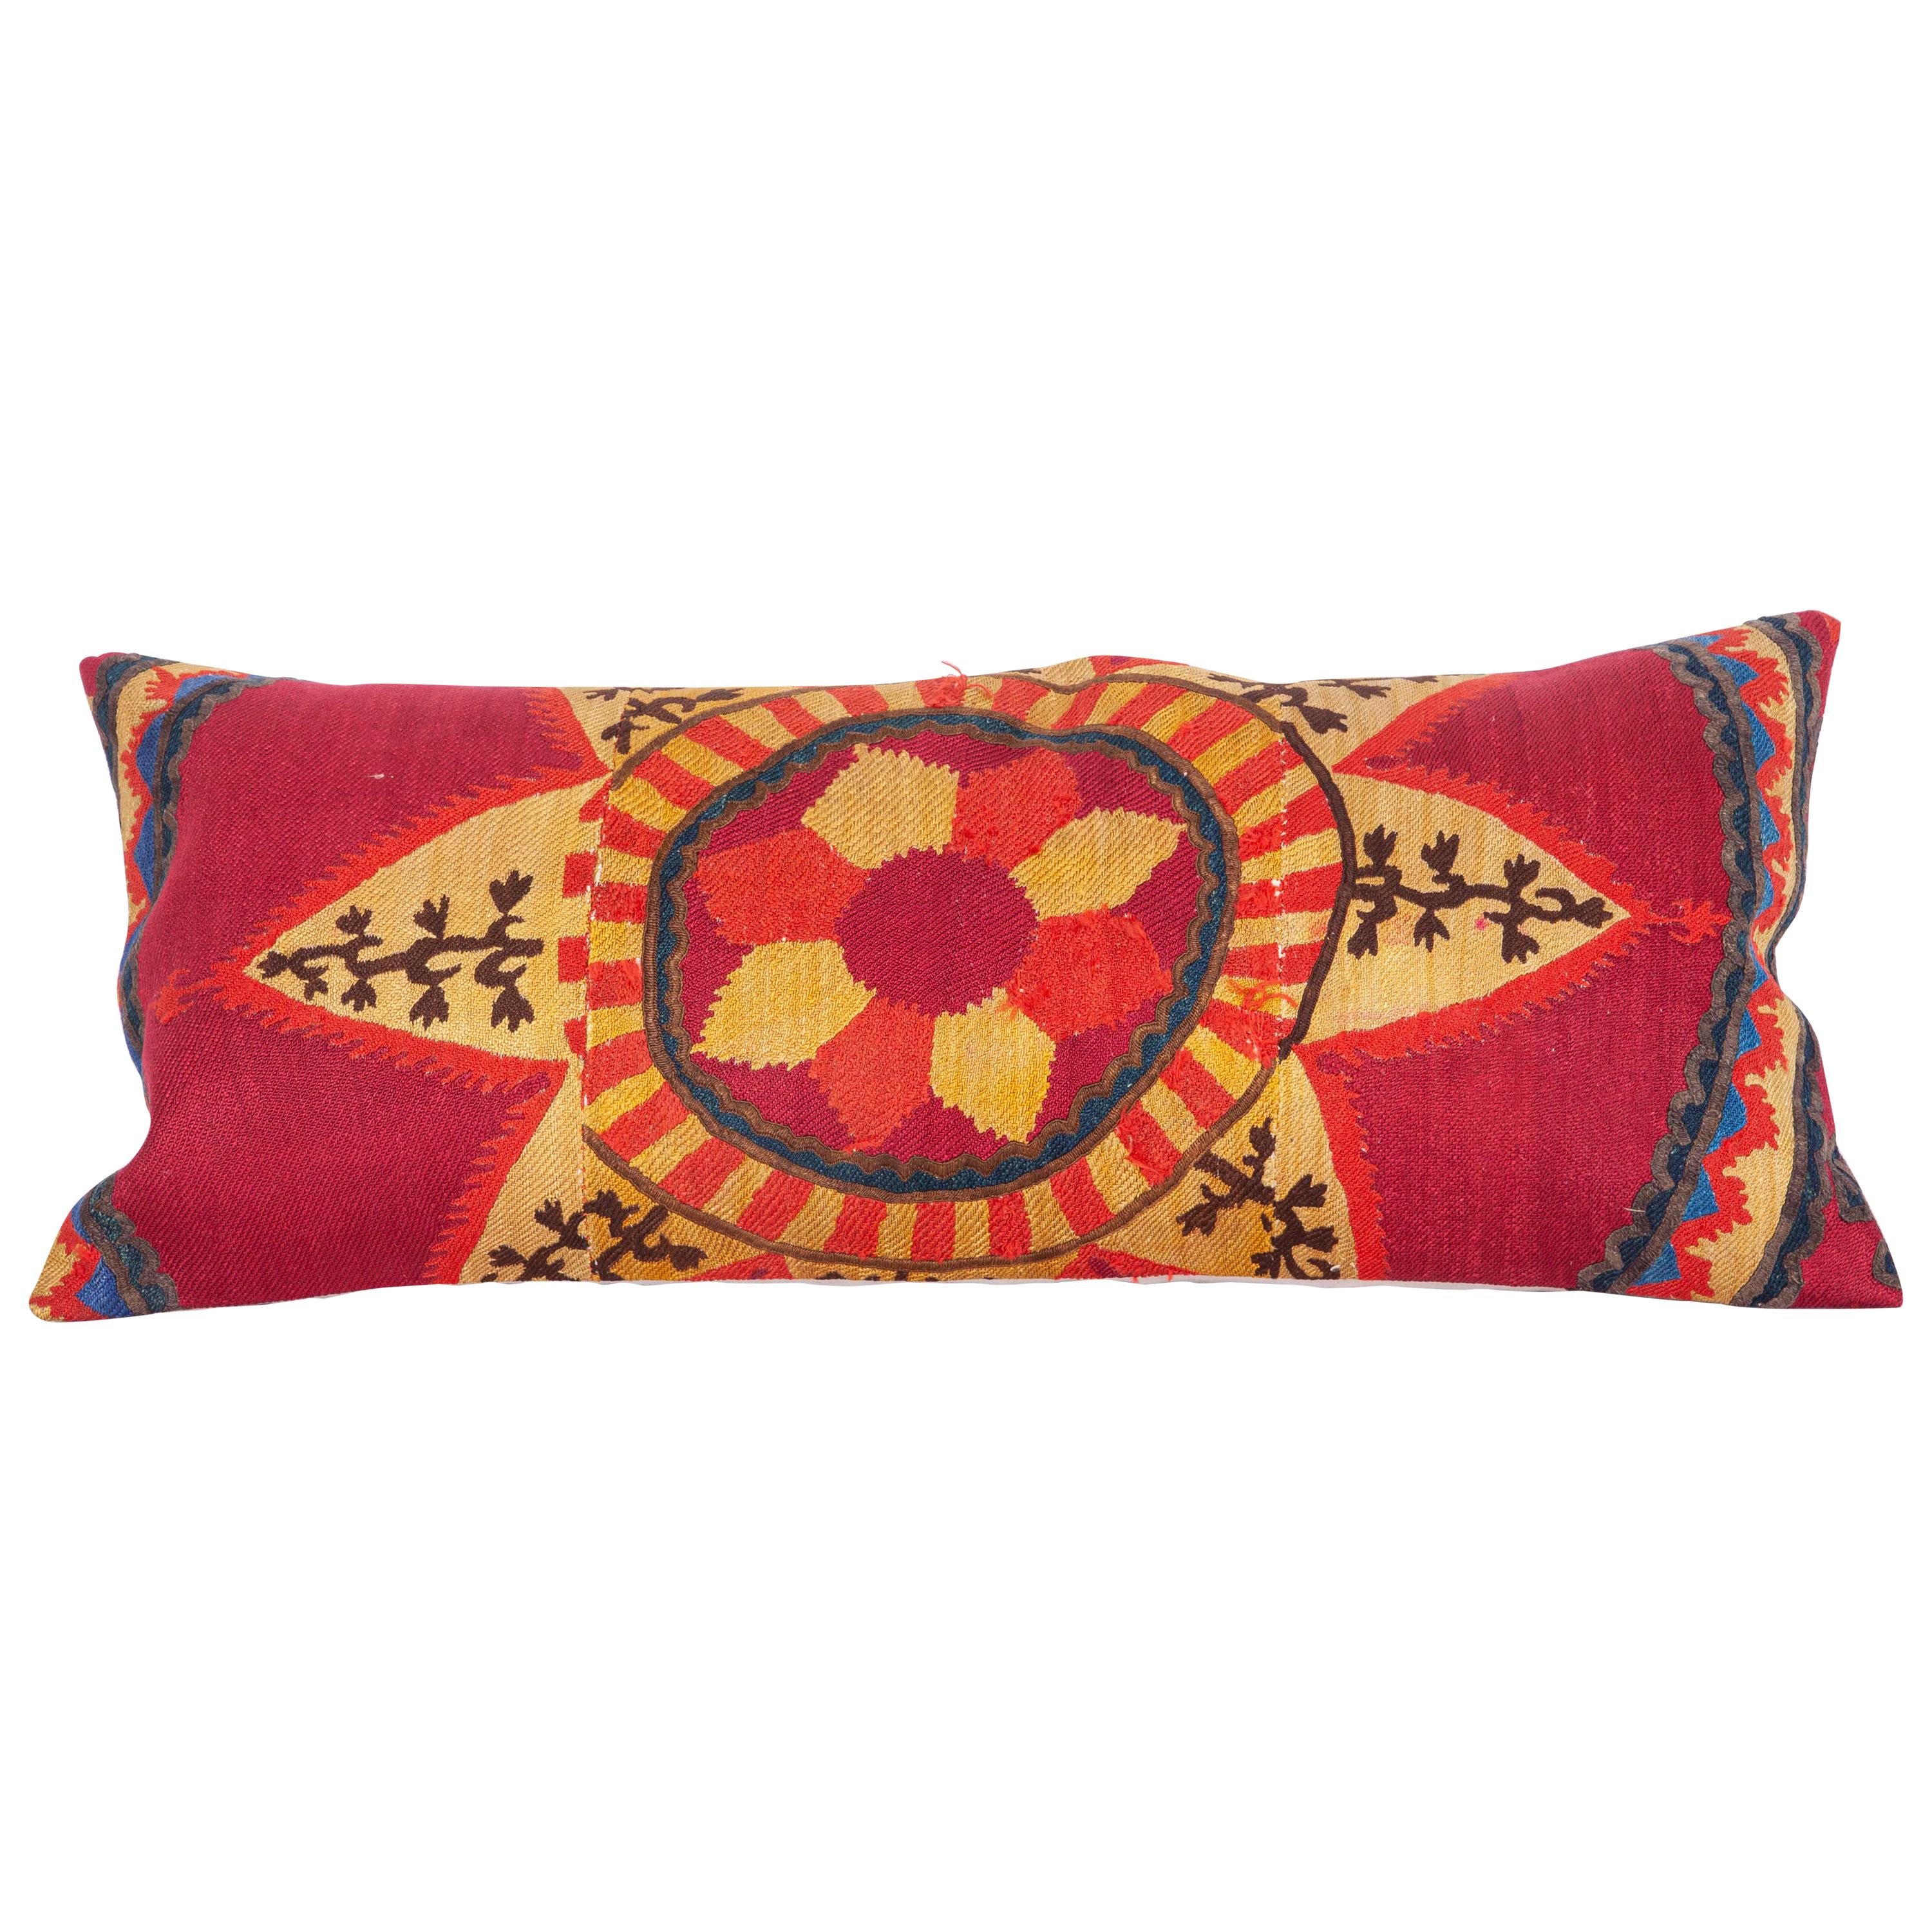 Antique Suzani Pillow Case Fashioned from a Late 19th Century Pishkent ...